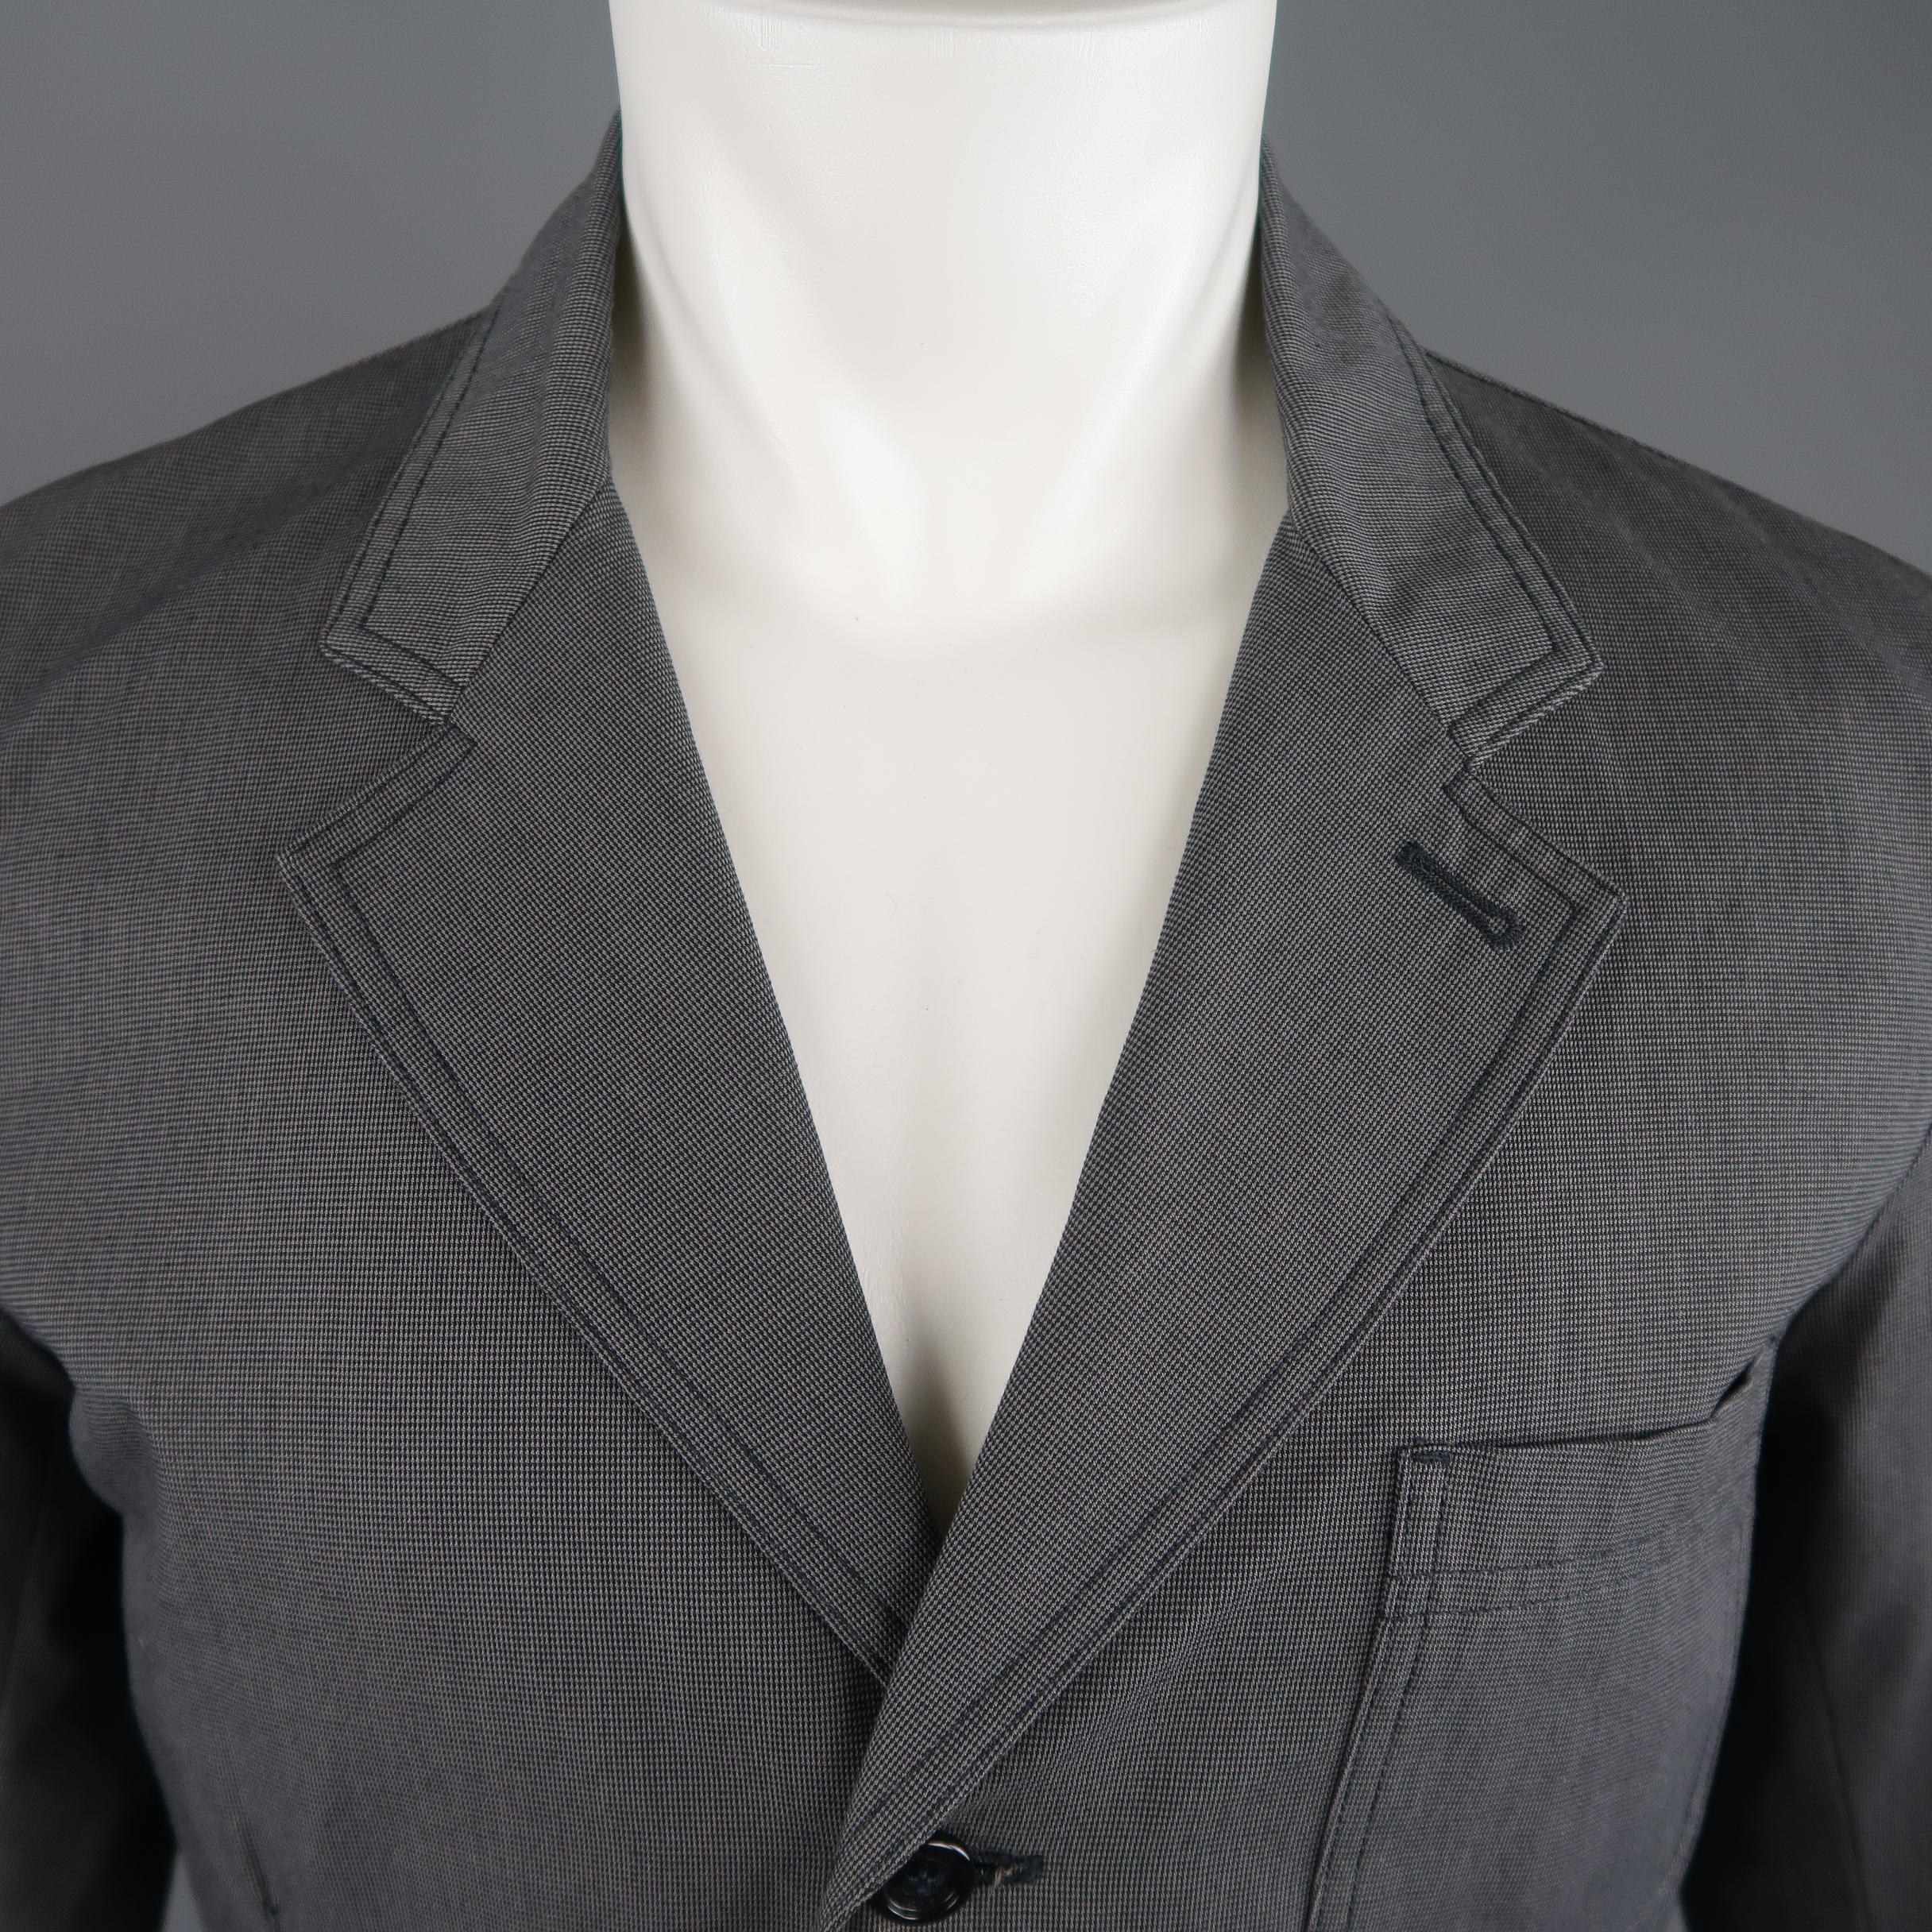 BURBERRY LONDON sport coat comes in gray nail-head cotton with a notch lapel, three button single breasted front, and patch flap pockets. 

Made in Italy. 
Excellent Pre-Owned Condition.
Marked: IT 50 R
 
Measurements:
 
Shoulder: 18 in.
Chest: 40